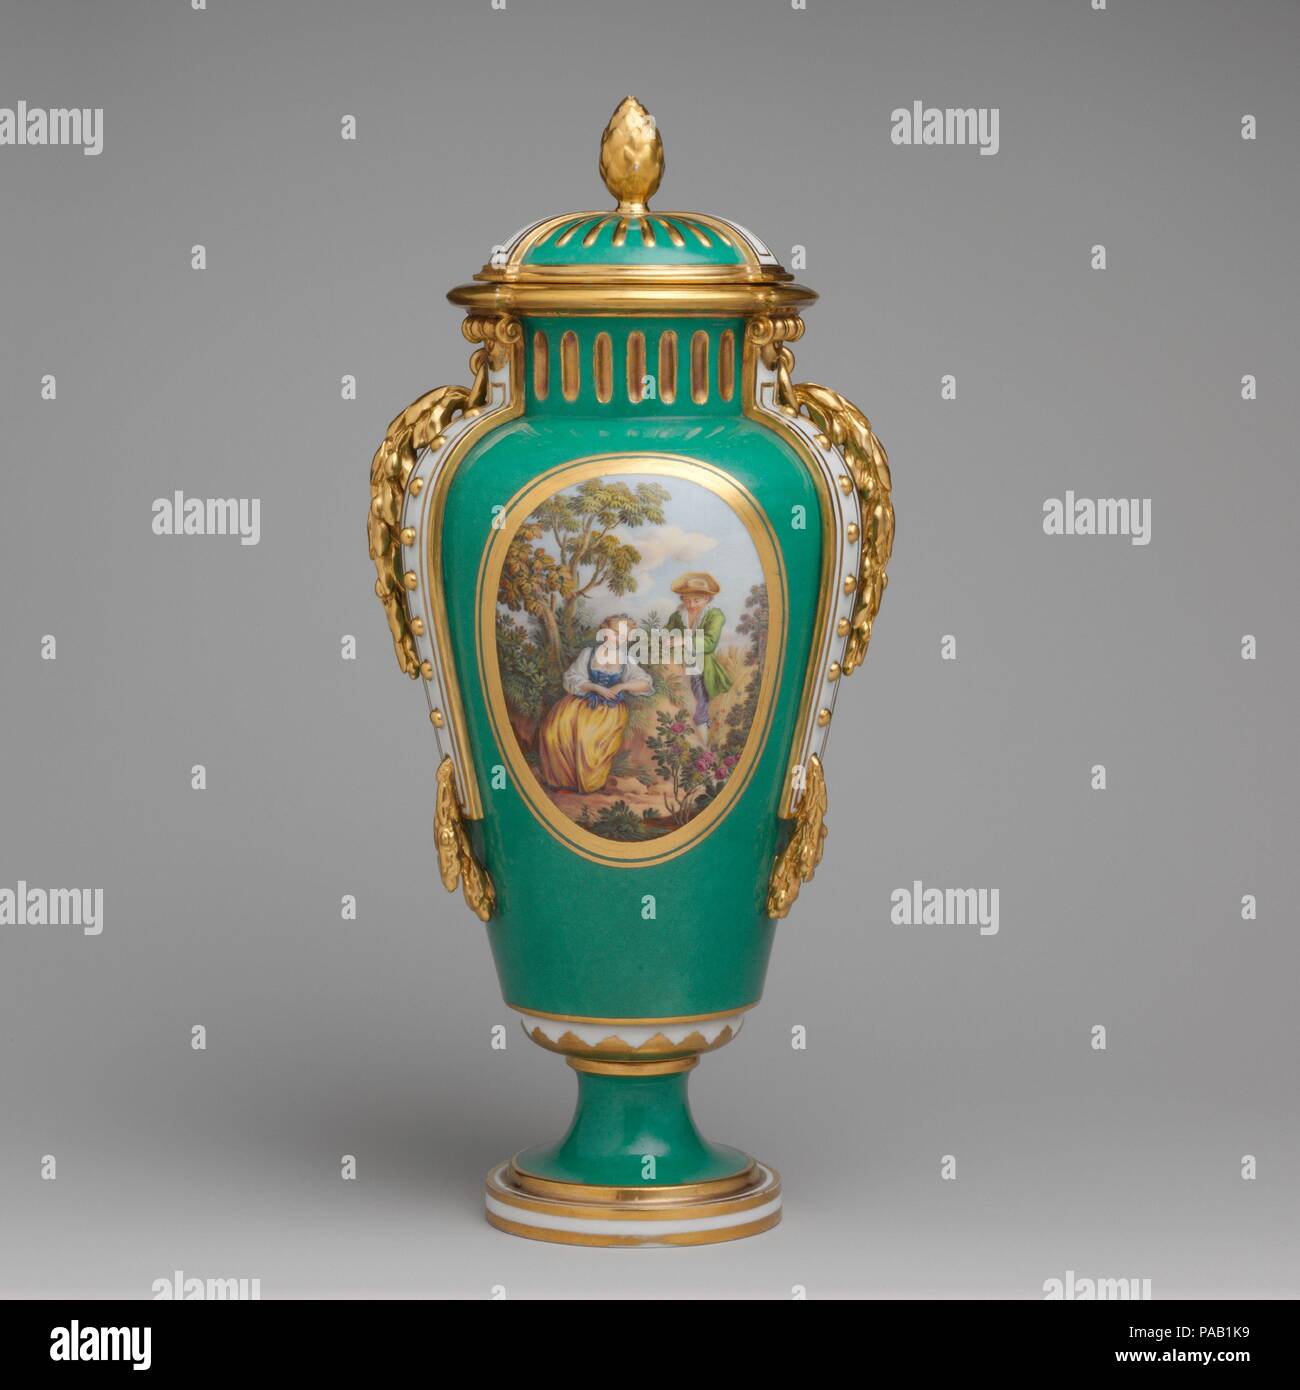 Vase with cover (vase à bandes) (one of a pair). Artist: After engravings by Louis Crépy (French); Based on a composition by Antoine Watteau (French, Valenciennes 1684-1721 Nogent-sur-Marne). Culture: French, Sèvres. Decorator: Gilded by Henry-Martin Prévost (French, active 1757-97); Figures by Charles Nicolas Dodin (French, Versailles 1734-1803 Sèvres). Dimensions: Height: 13 1/16 in. (33.2 cm). Factory: Sèvres Manufactory (French, 1740-present). Date: ca. 1770-75.  The bucolic scenes on the front of these vases (see also 58.75.69a, b) are after compositions by the French painter Jean-Antoine Stock Photo